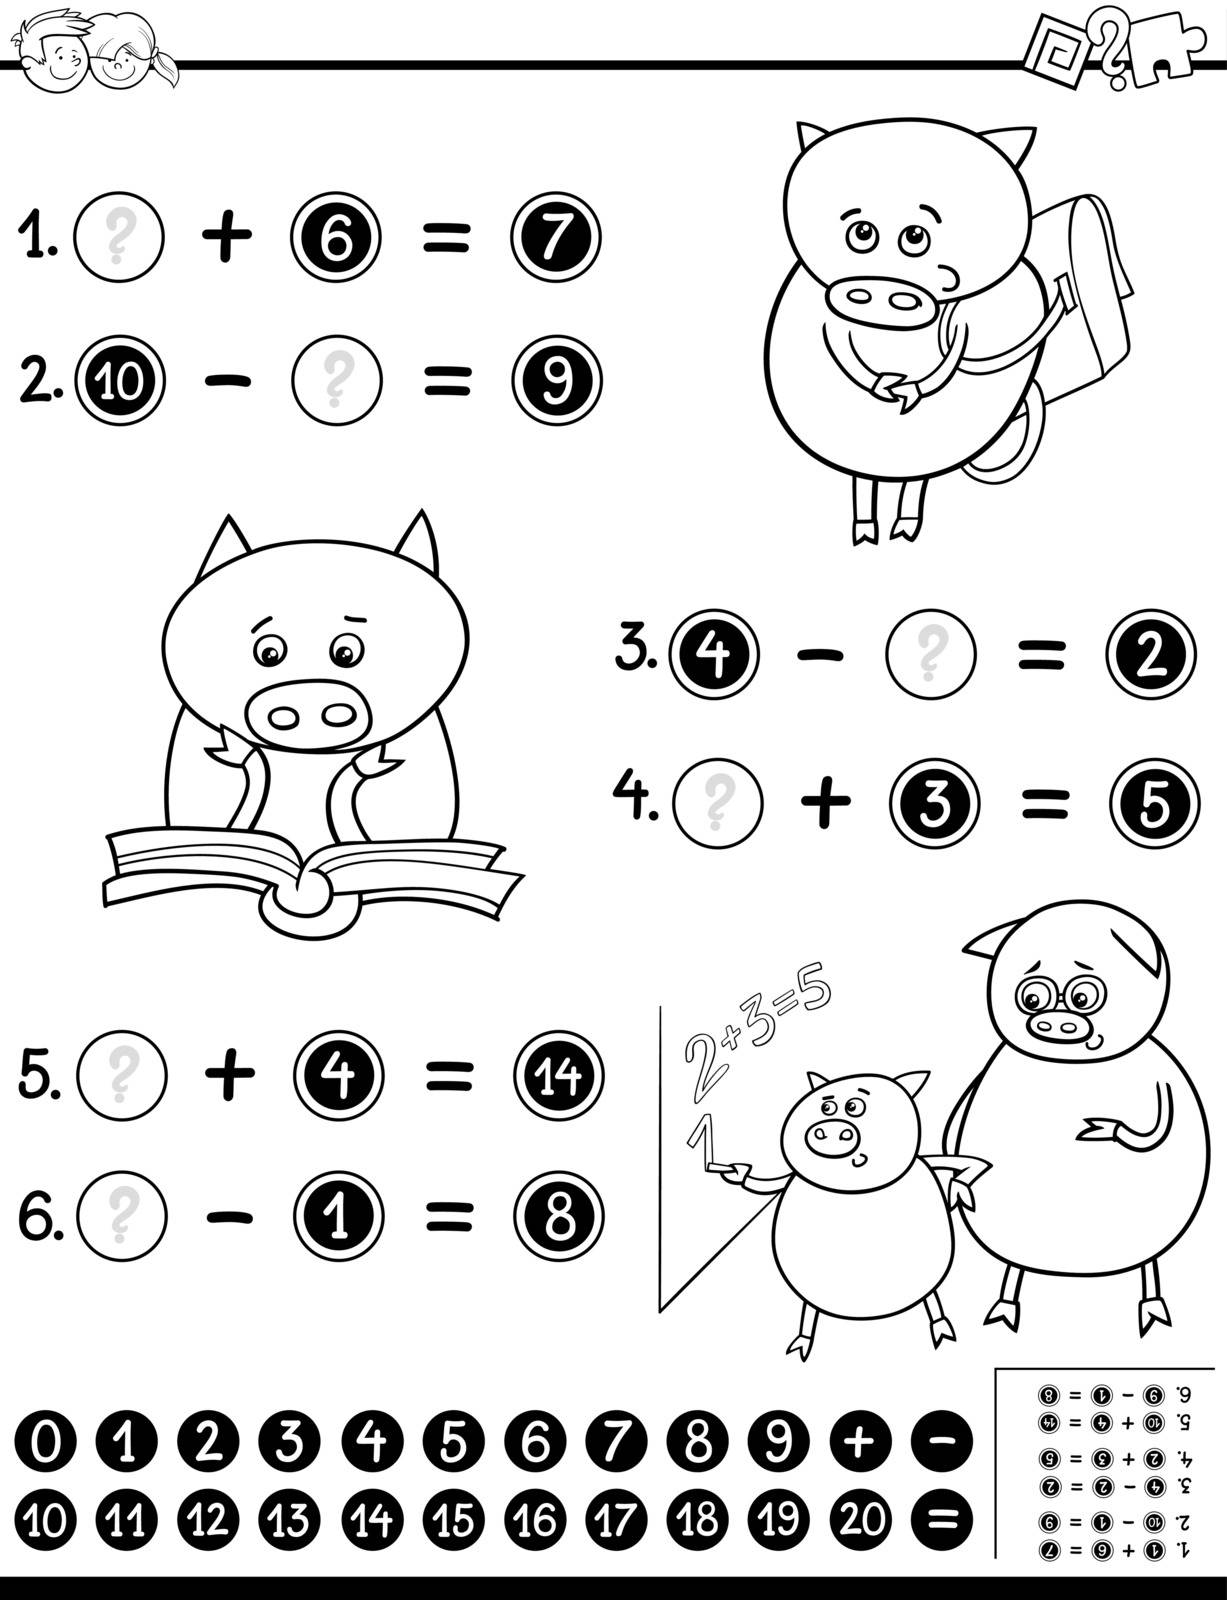 Black and White Cartoon Illustration of Educational Mathematical Activity Worksheet for Kids Coloring Page